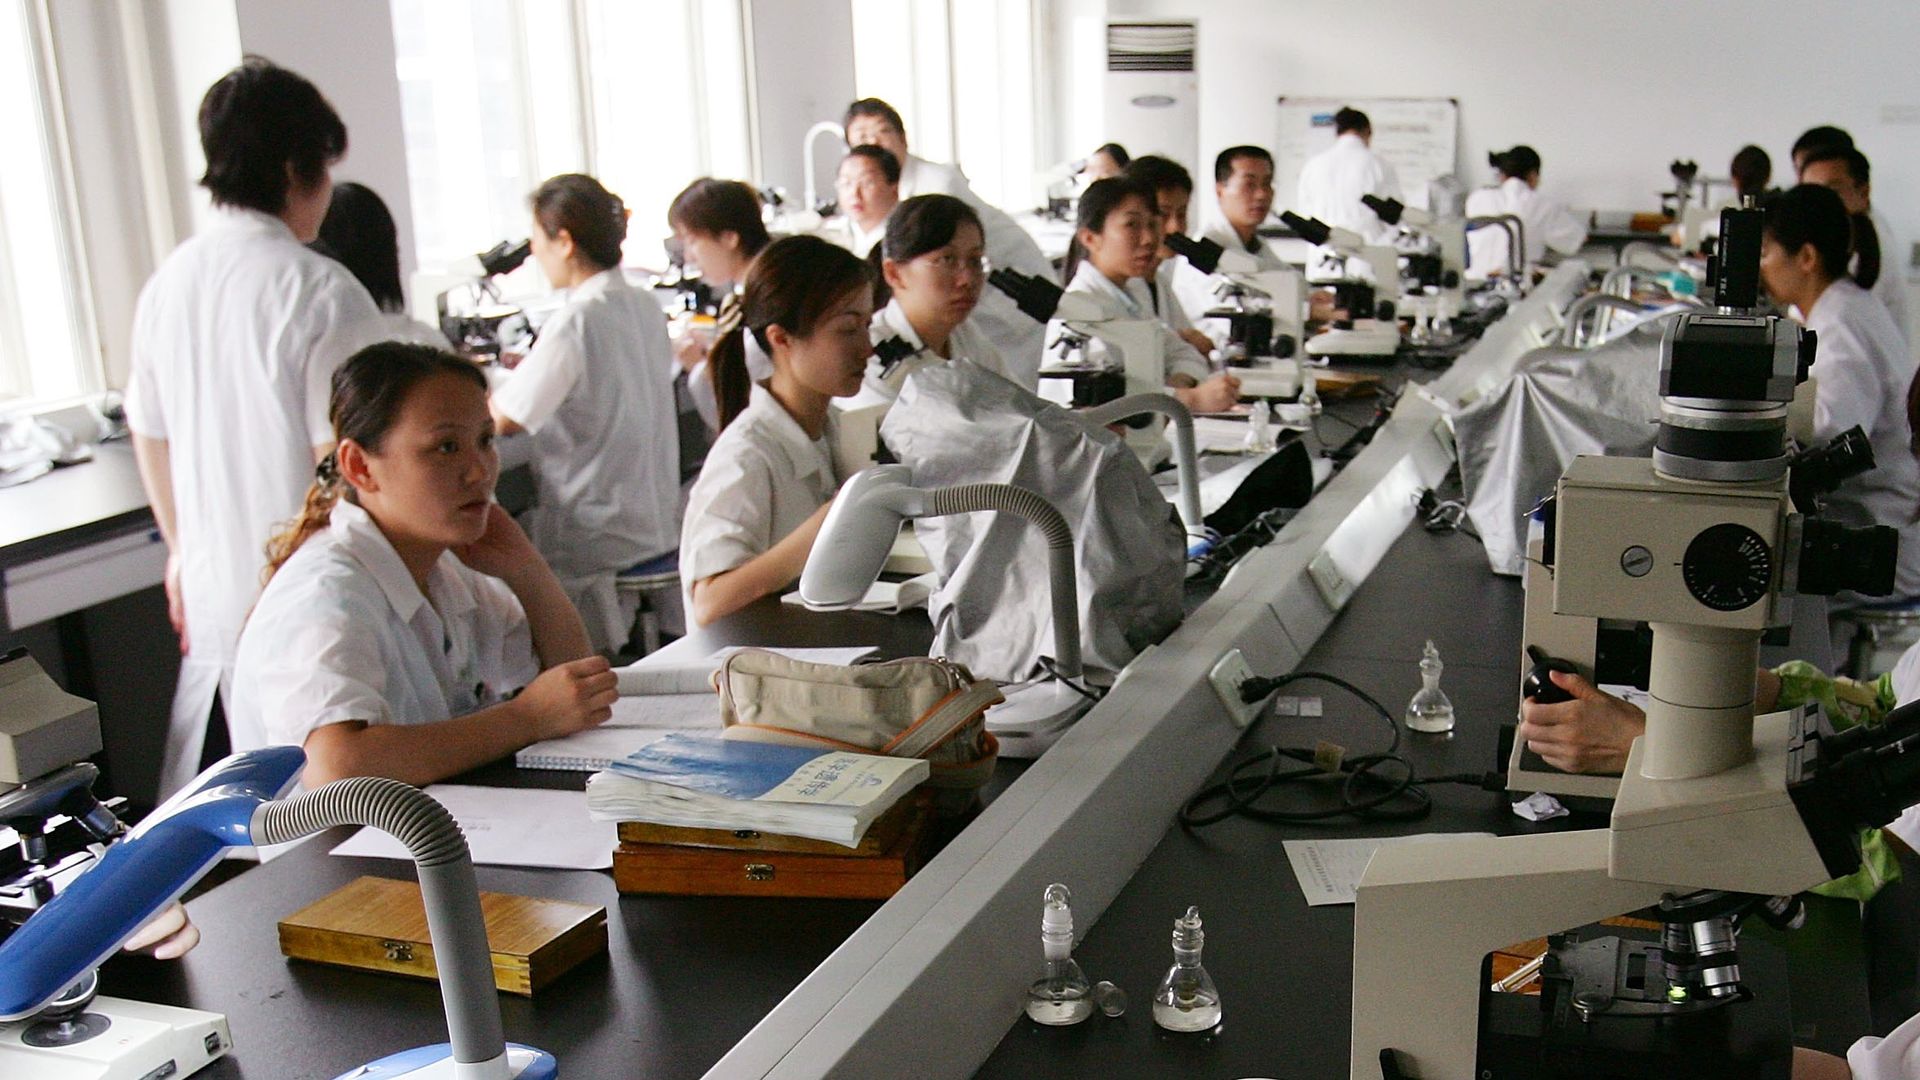 A row of people in lab coats looking into microscopes